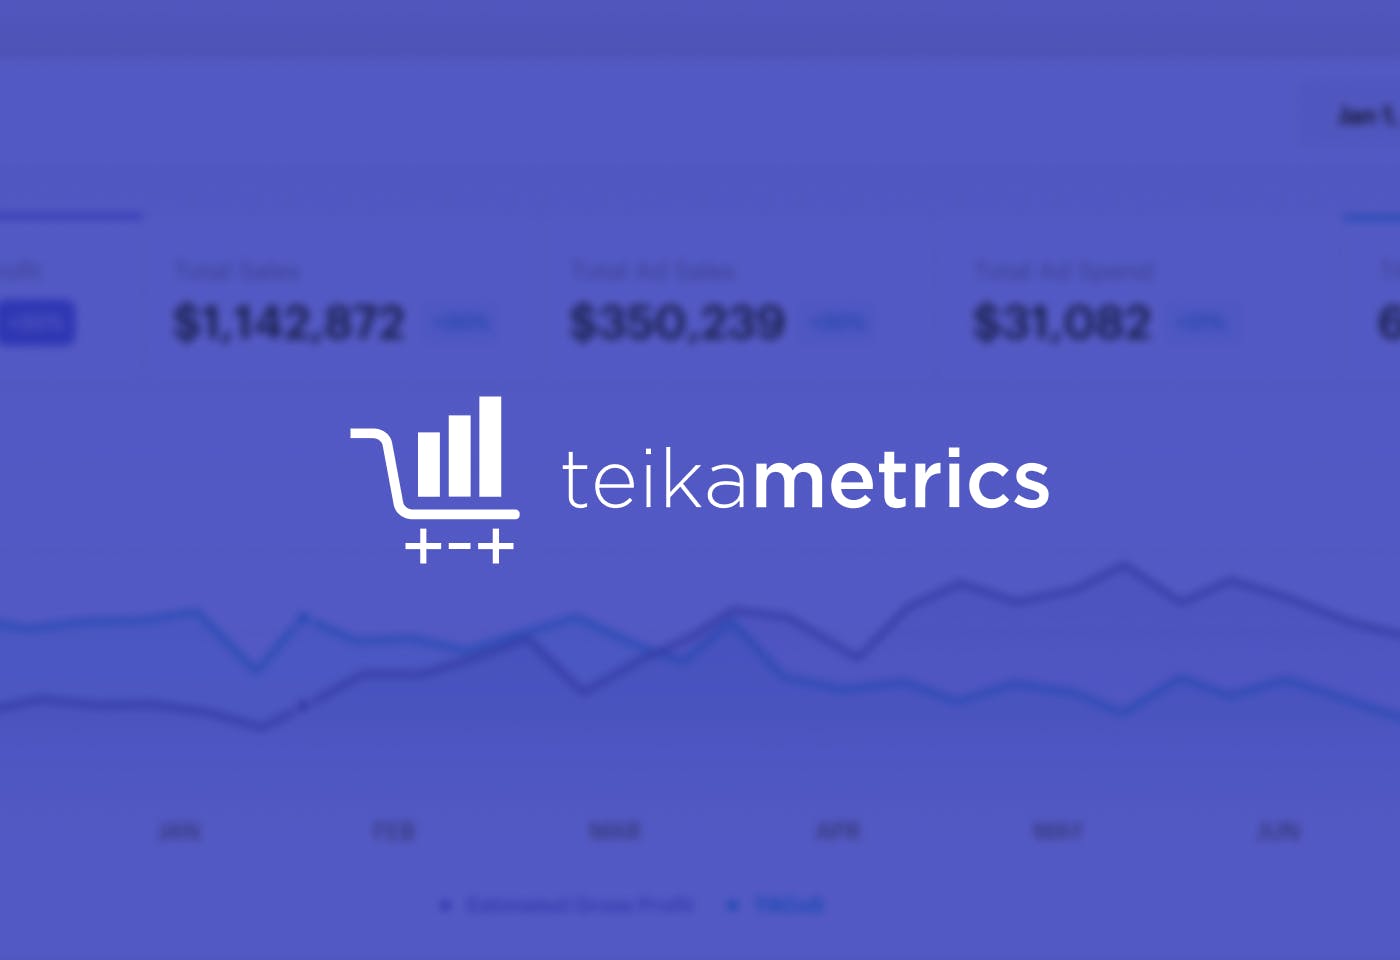 The Teikametrics logo on a purple background with an image of the application blurred out behind it.